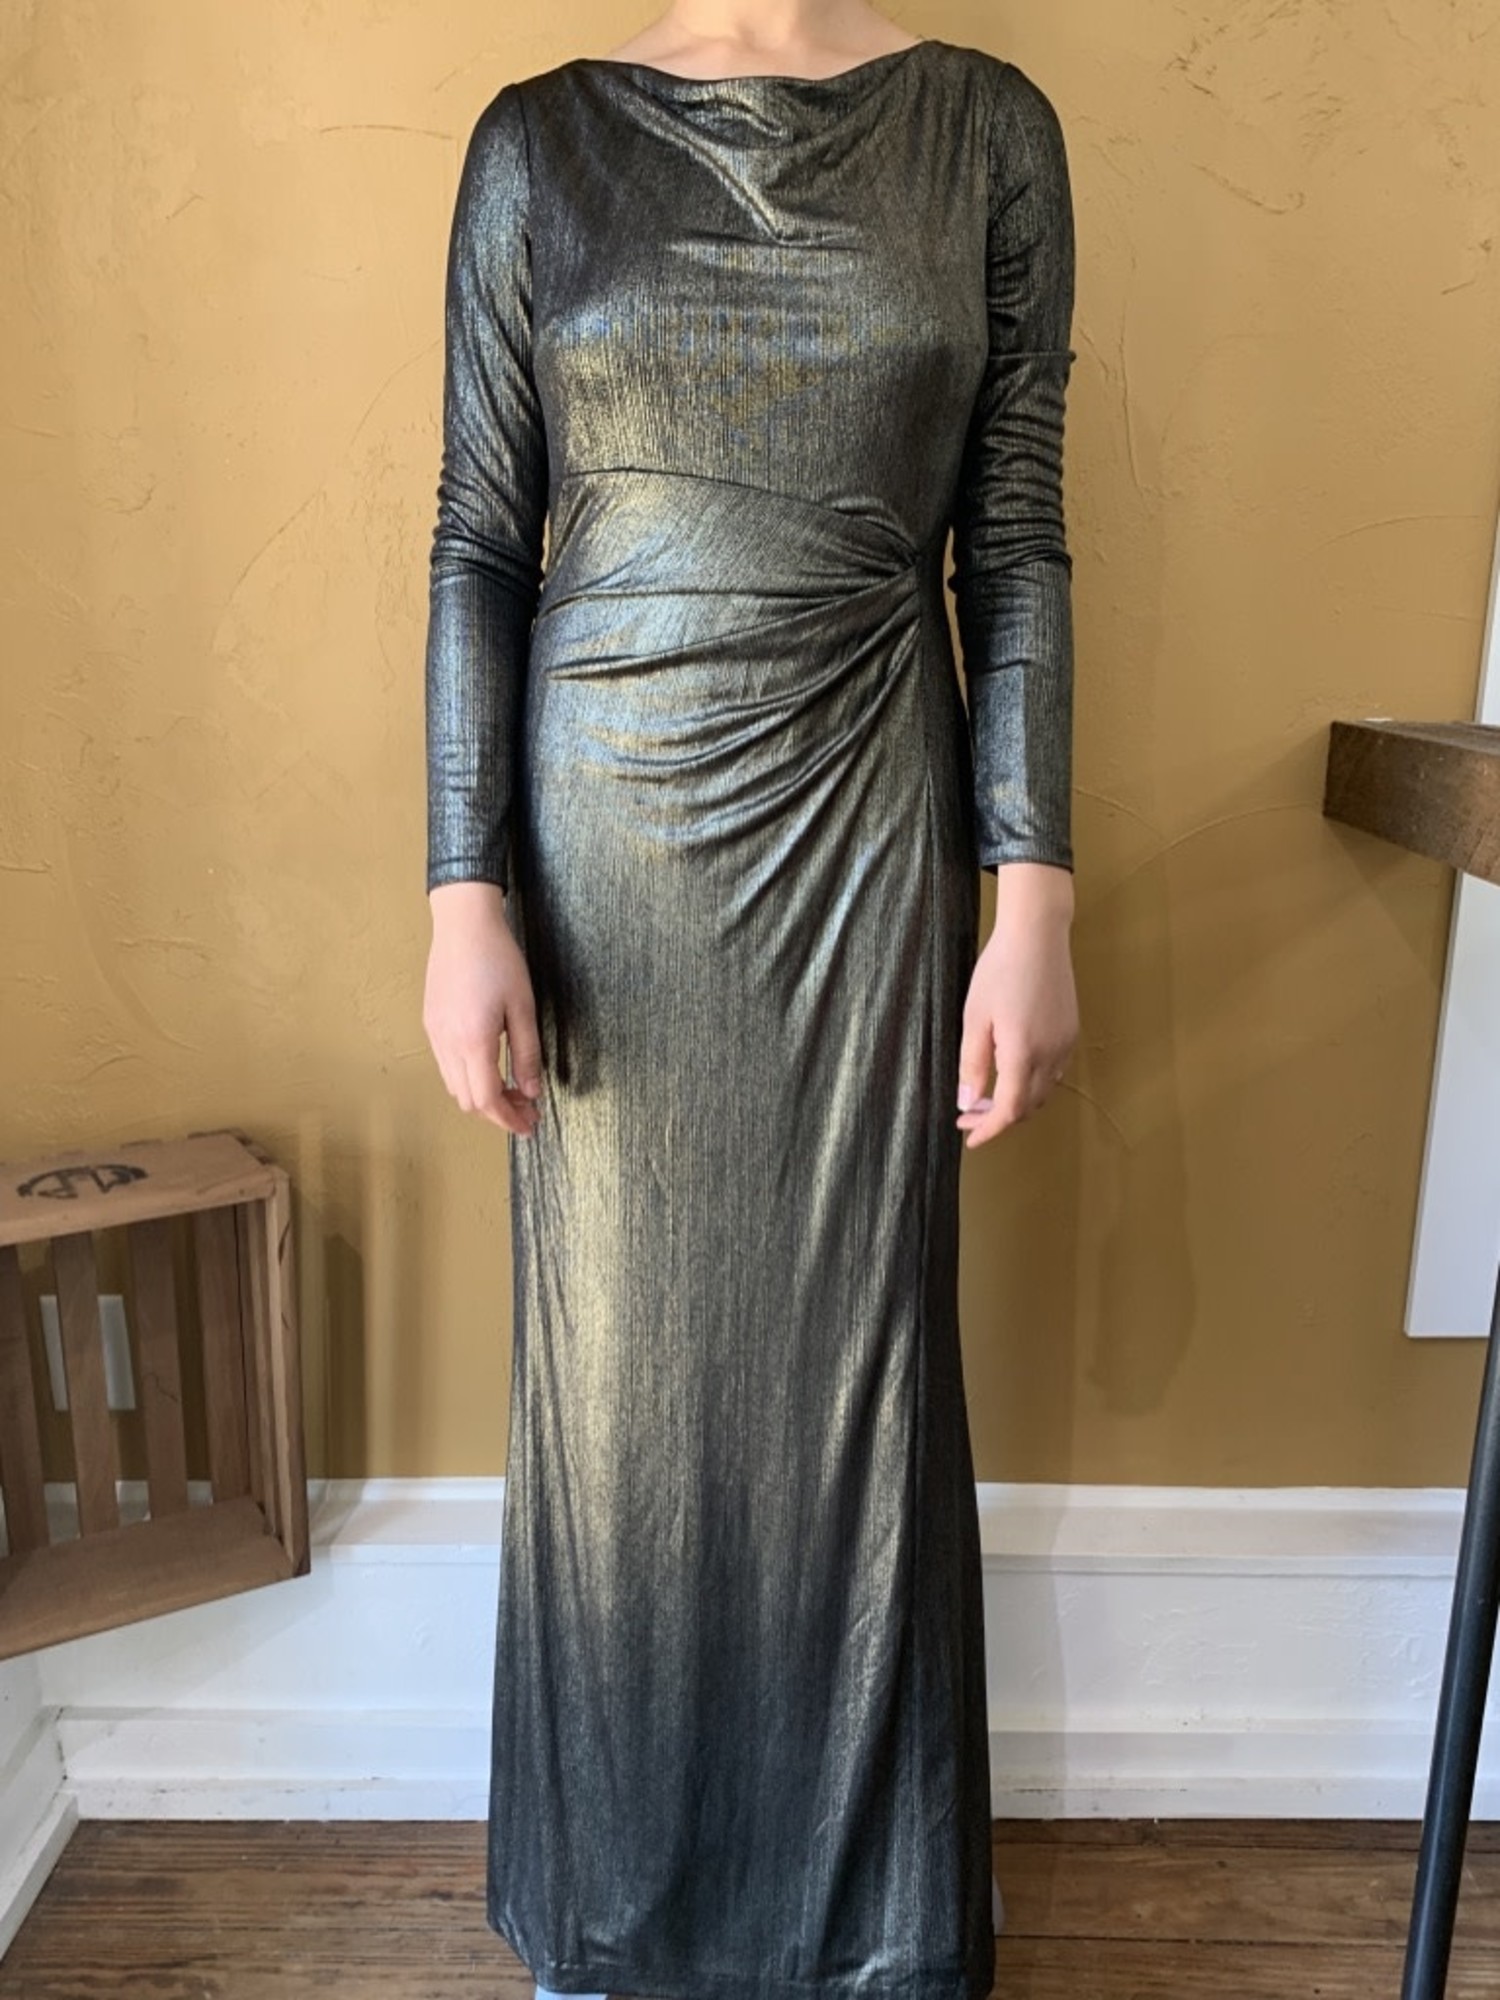 Long Sleeve Gold and Black Metallic Dress, Size 6 - Elements Unleashed